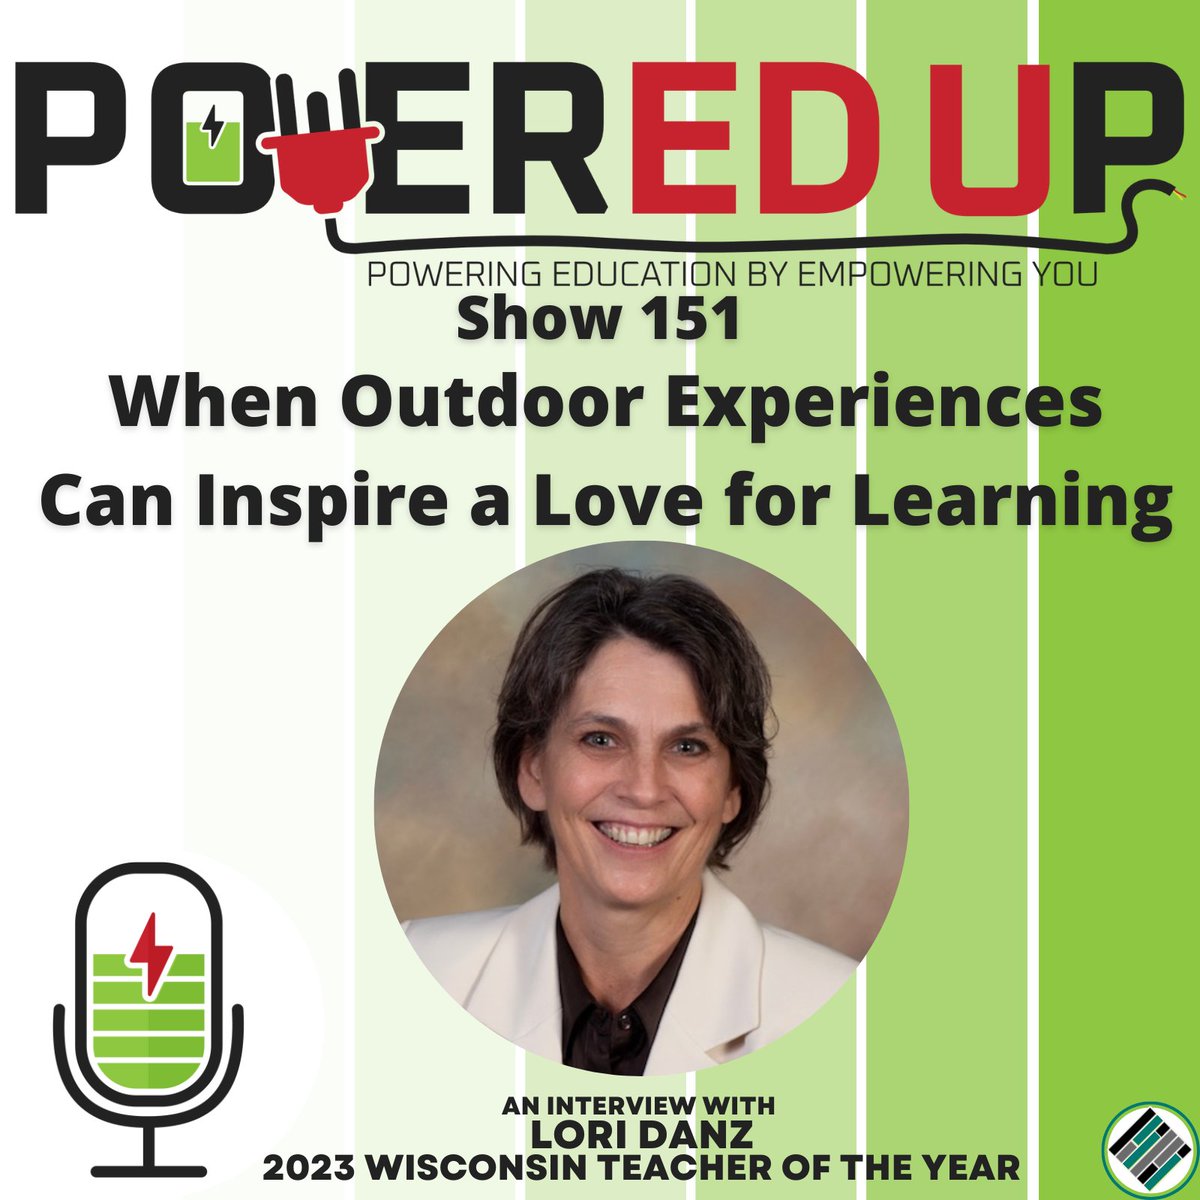 NEW EPISODE dropped today w/ @LoriDanz2 the @WisconsinDPI Teacher of the Year. So many ideas to implement into the classroom. Tune in to hear how she leads her district with their 'classroom forest'. Yes it is a real forest. podcasts.apple.com/us/podcast/pow…